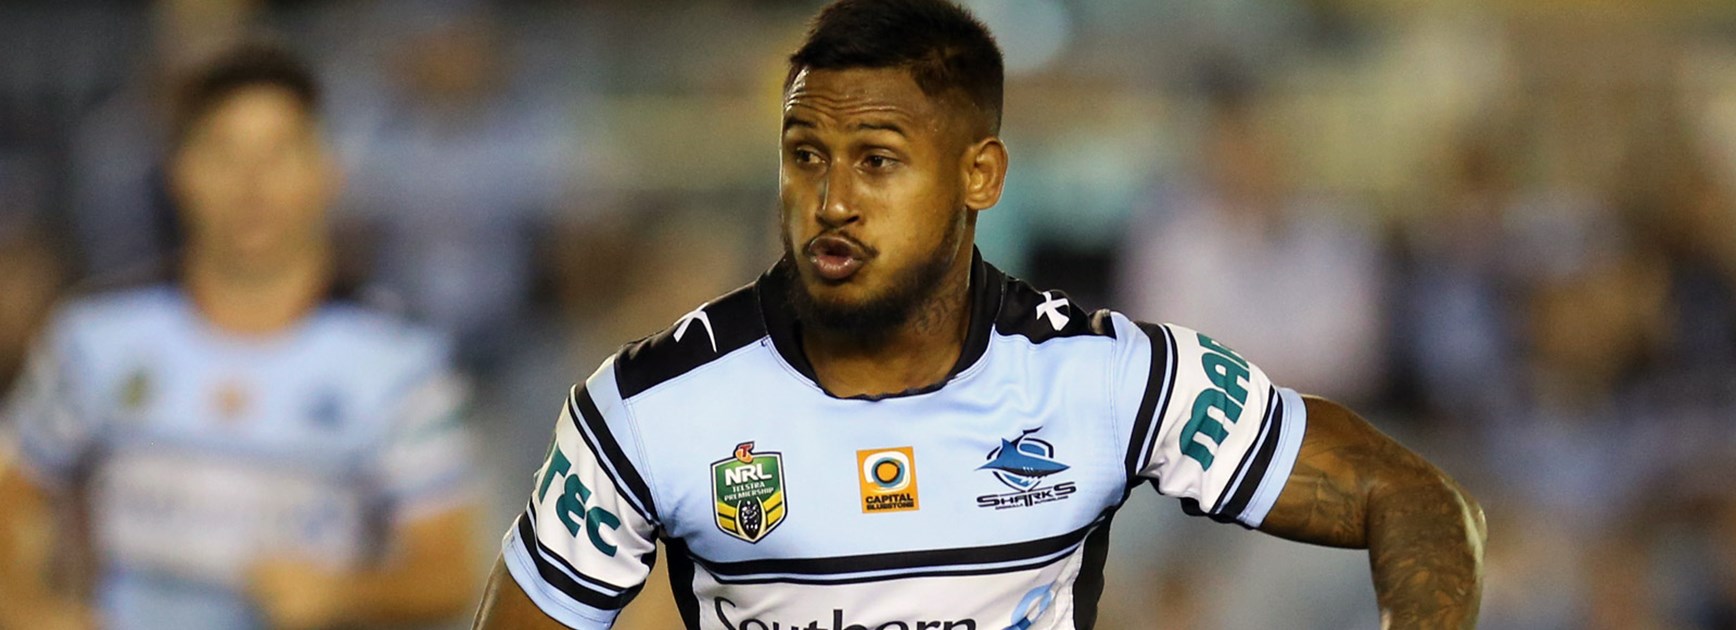 Ben Barba has excelled since moving back to fullback for the Sharks in 2016.